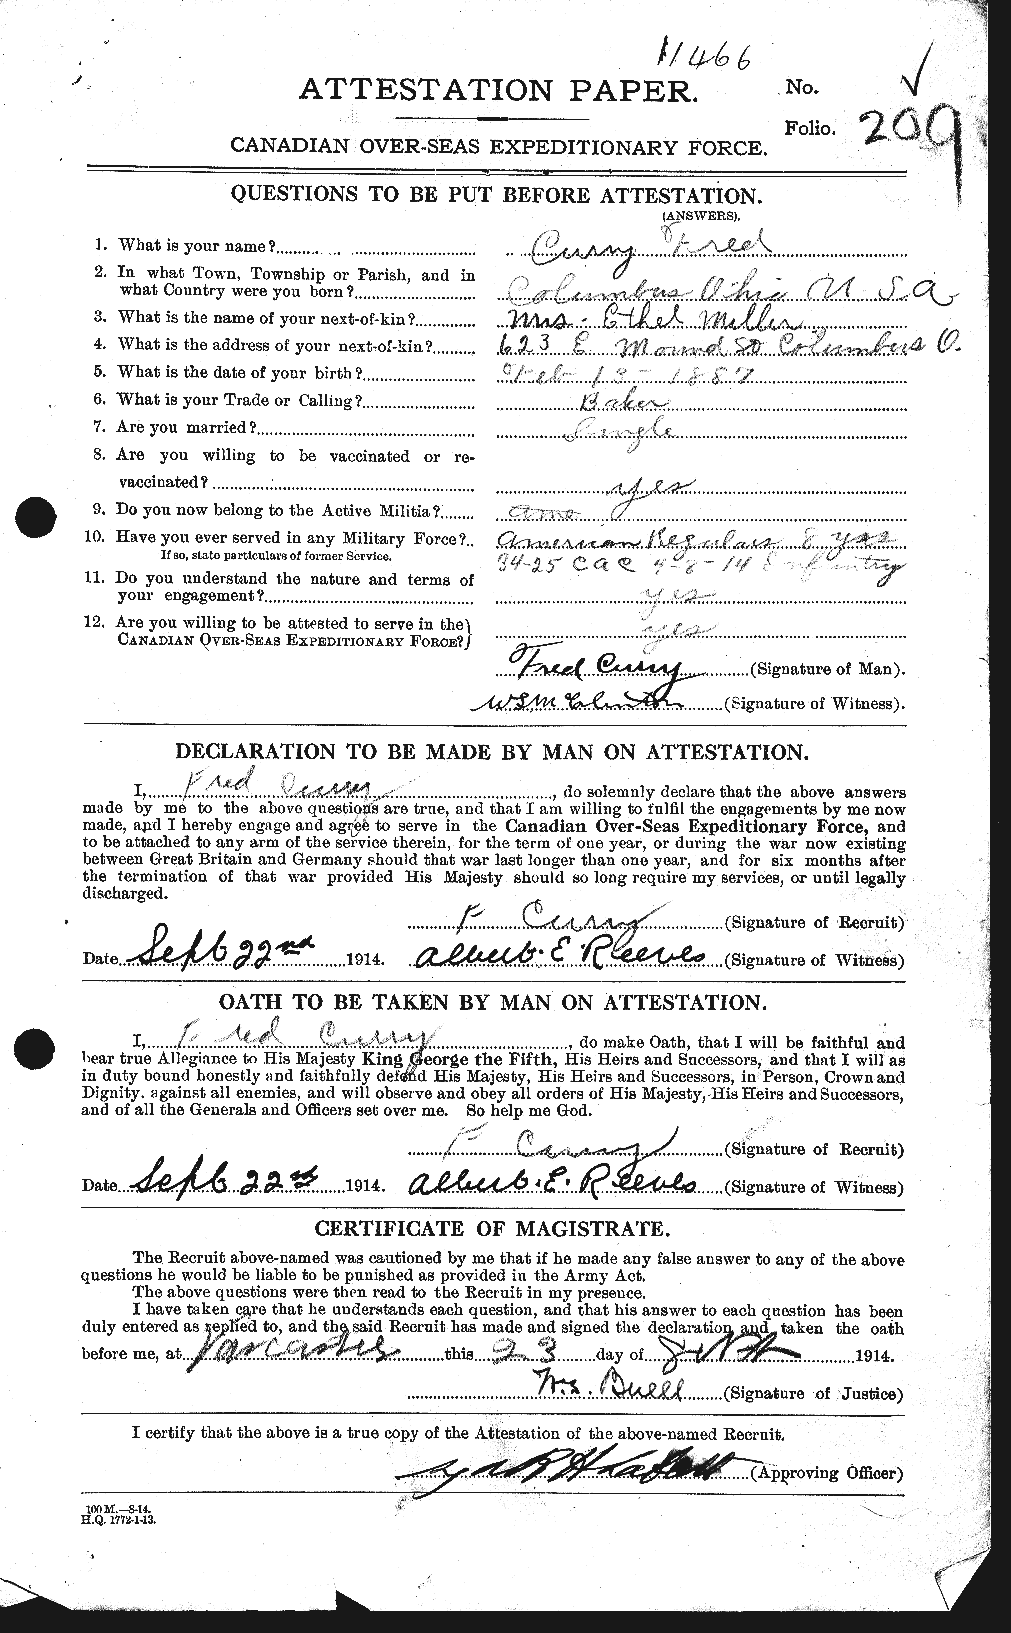 Personnel Records of the First World War - CEF 071191a